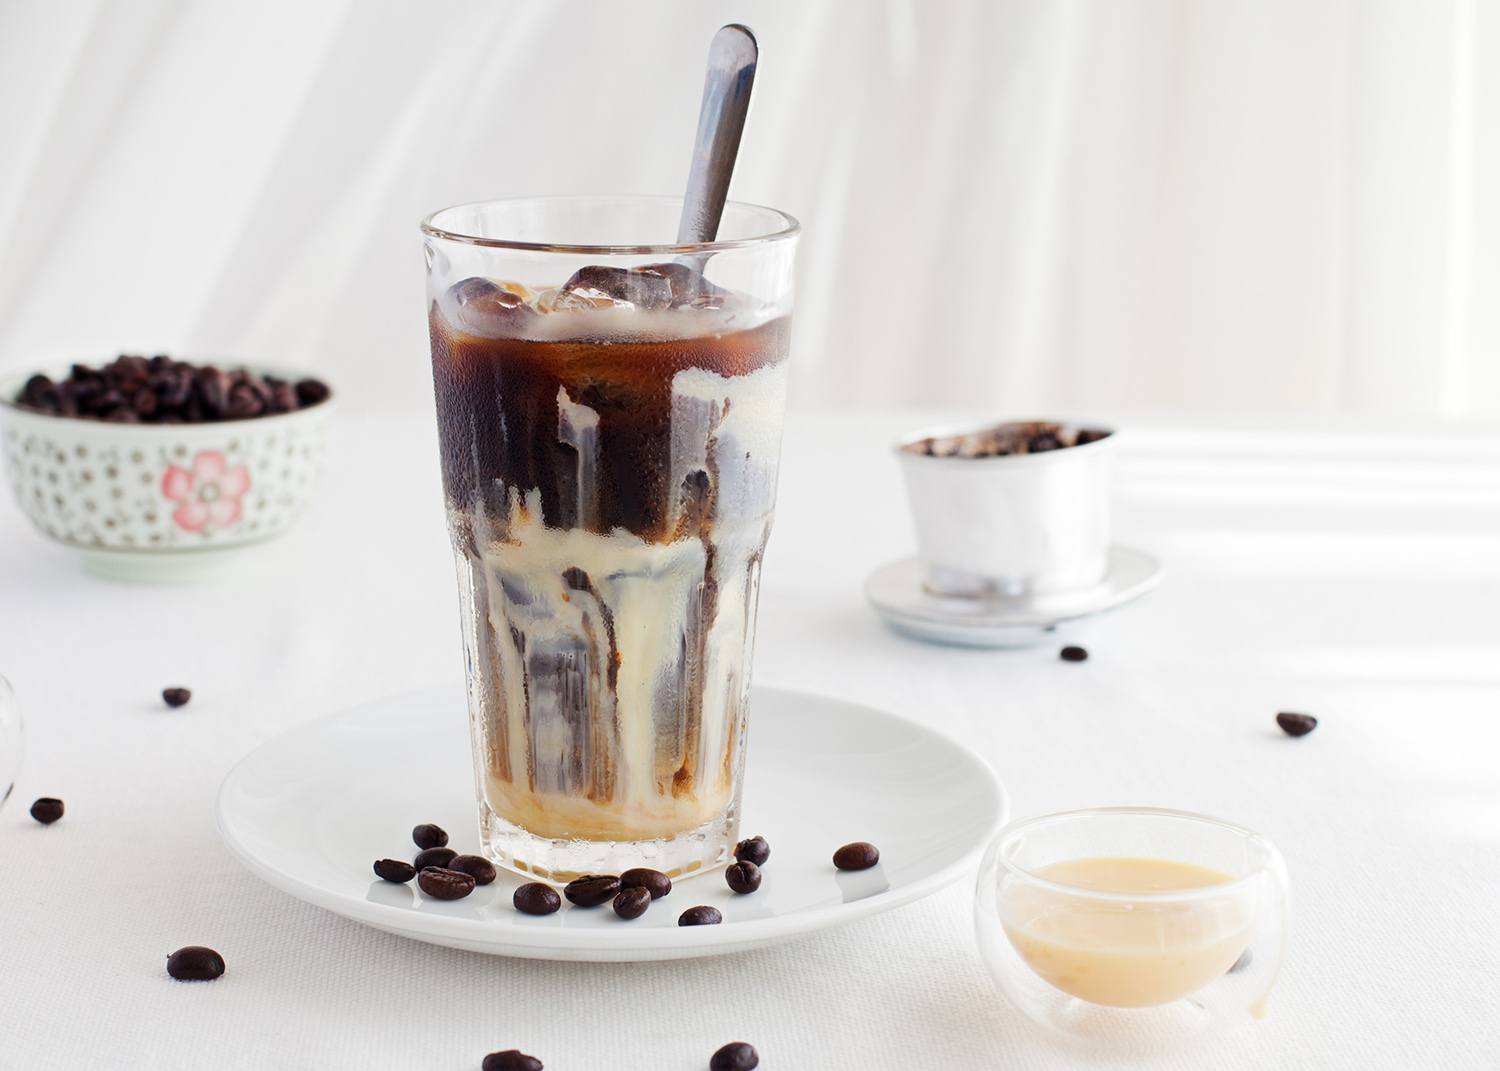 Ice coffee with condensed milk, traditional Vietnamese, Thai coffee with coffee beans on a white plate background